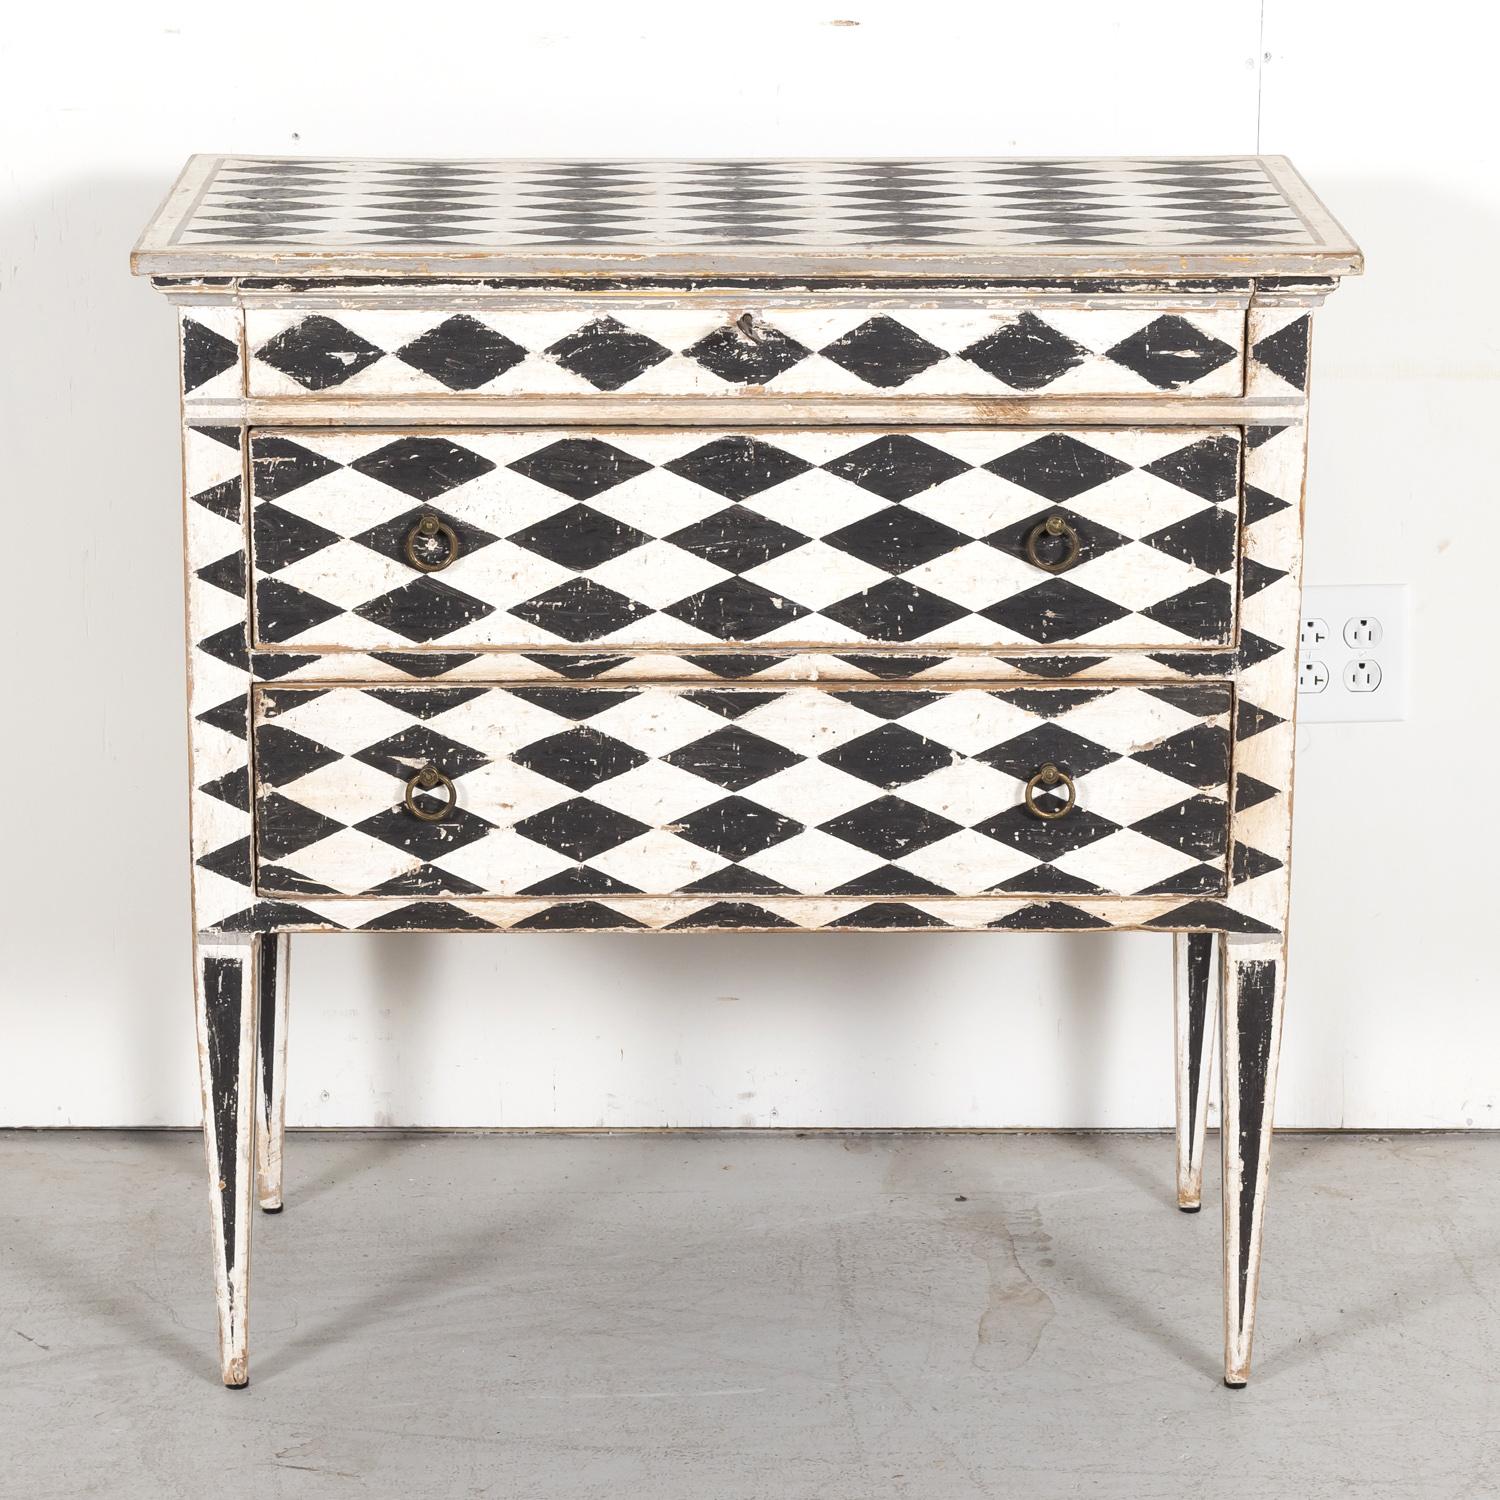 Early 20th century French Louis XVI style hand painted petite commode having a rectangular top over a single frieze drawer atop two full drawers adorned with original circular brass pulls, circa 1920s. Raised on straight tapered legs. This fabulous